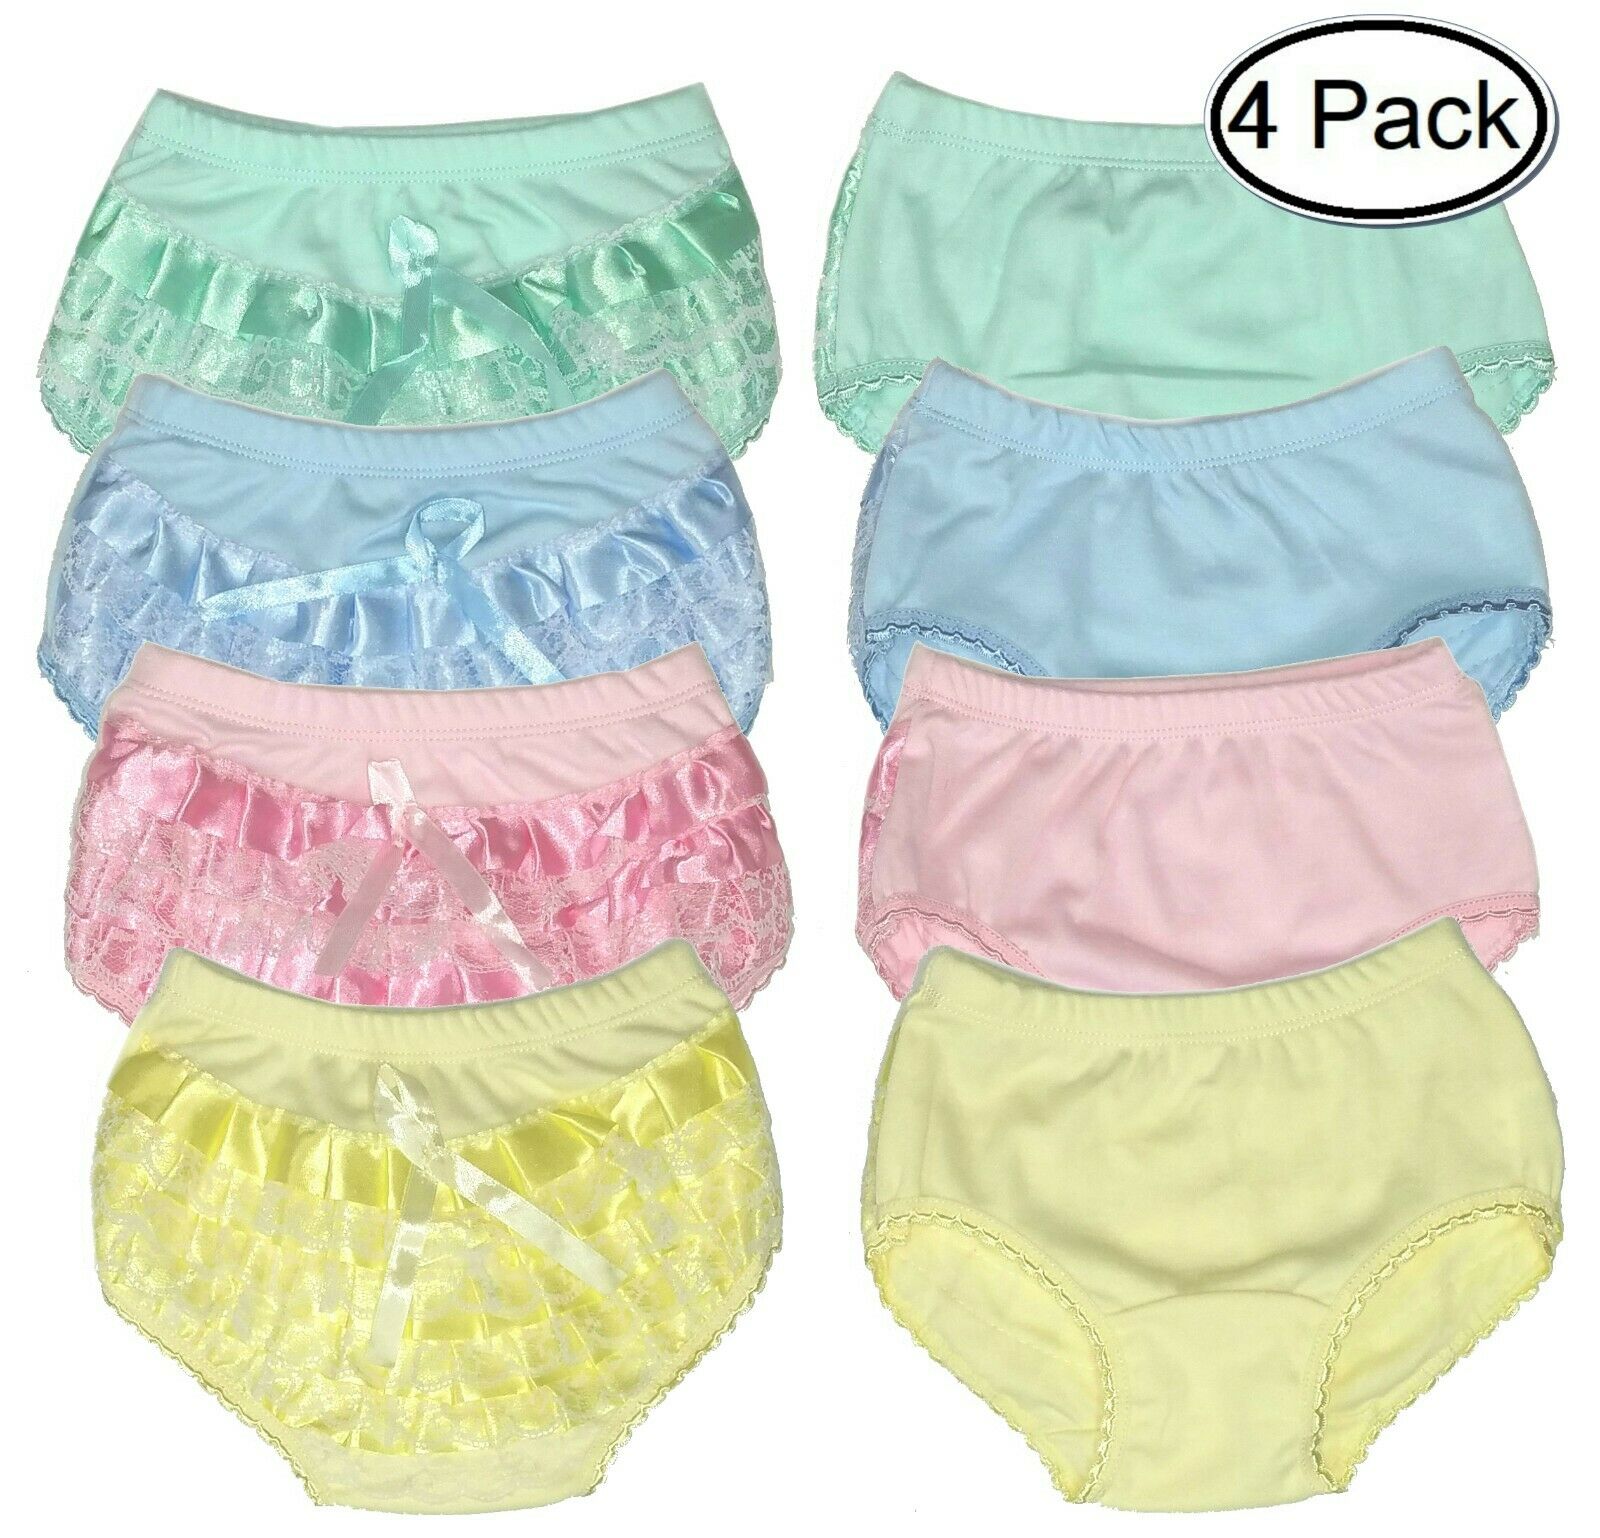 Baby Bloomers Diaper Cover Cloth Lace Ruffle Toddler Girls Panties 4-pack Rumba